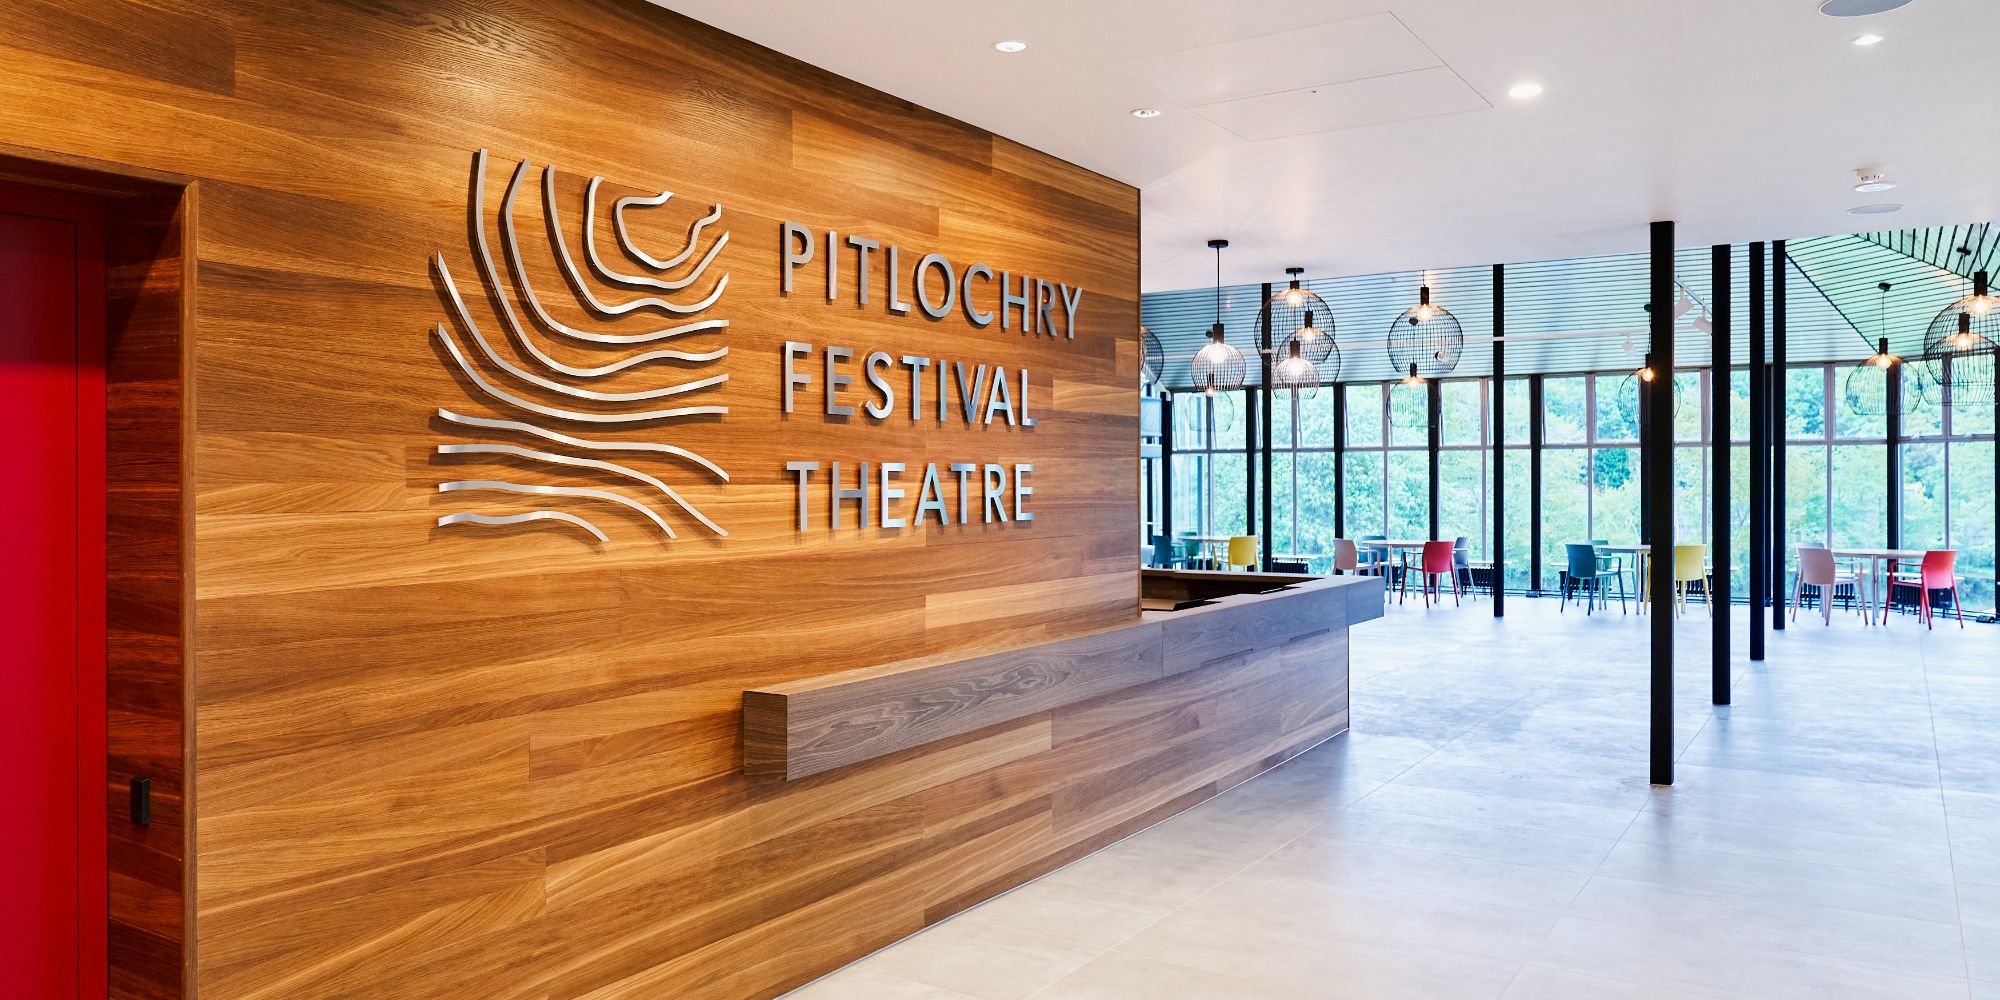 An image of a logo and the text 'Pitlochry Festival Theatre' to the right with some tables and chairs in the background.